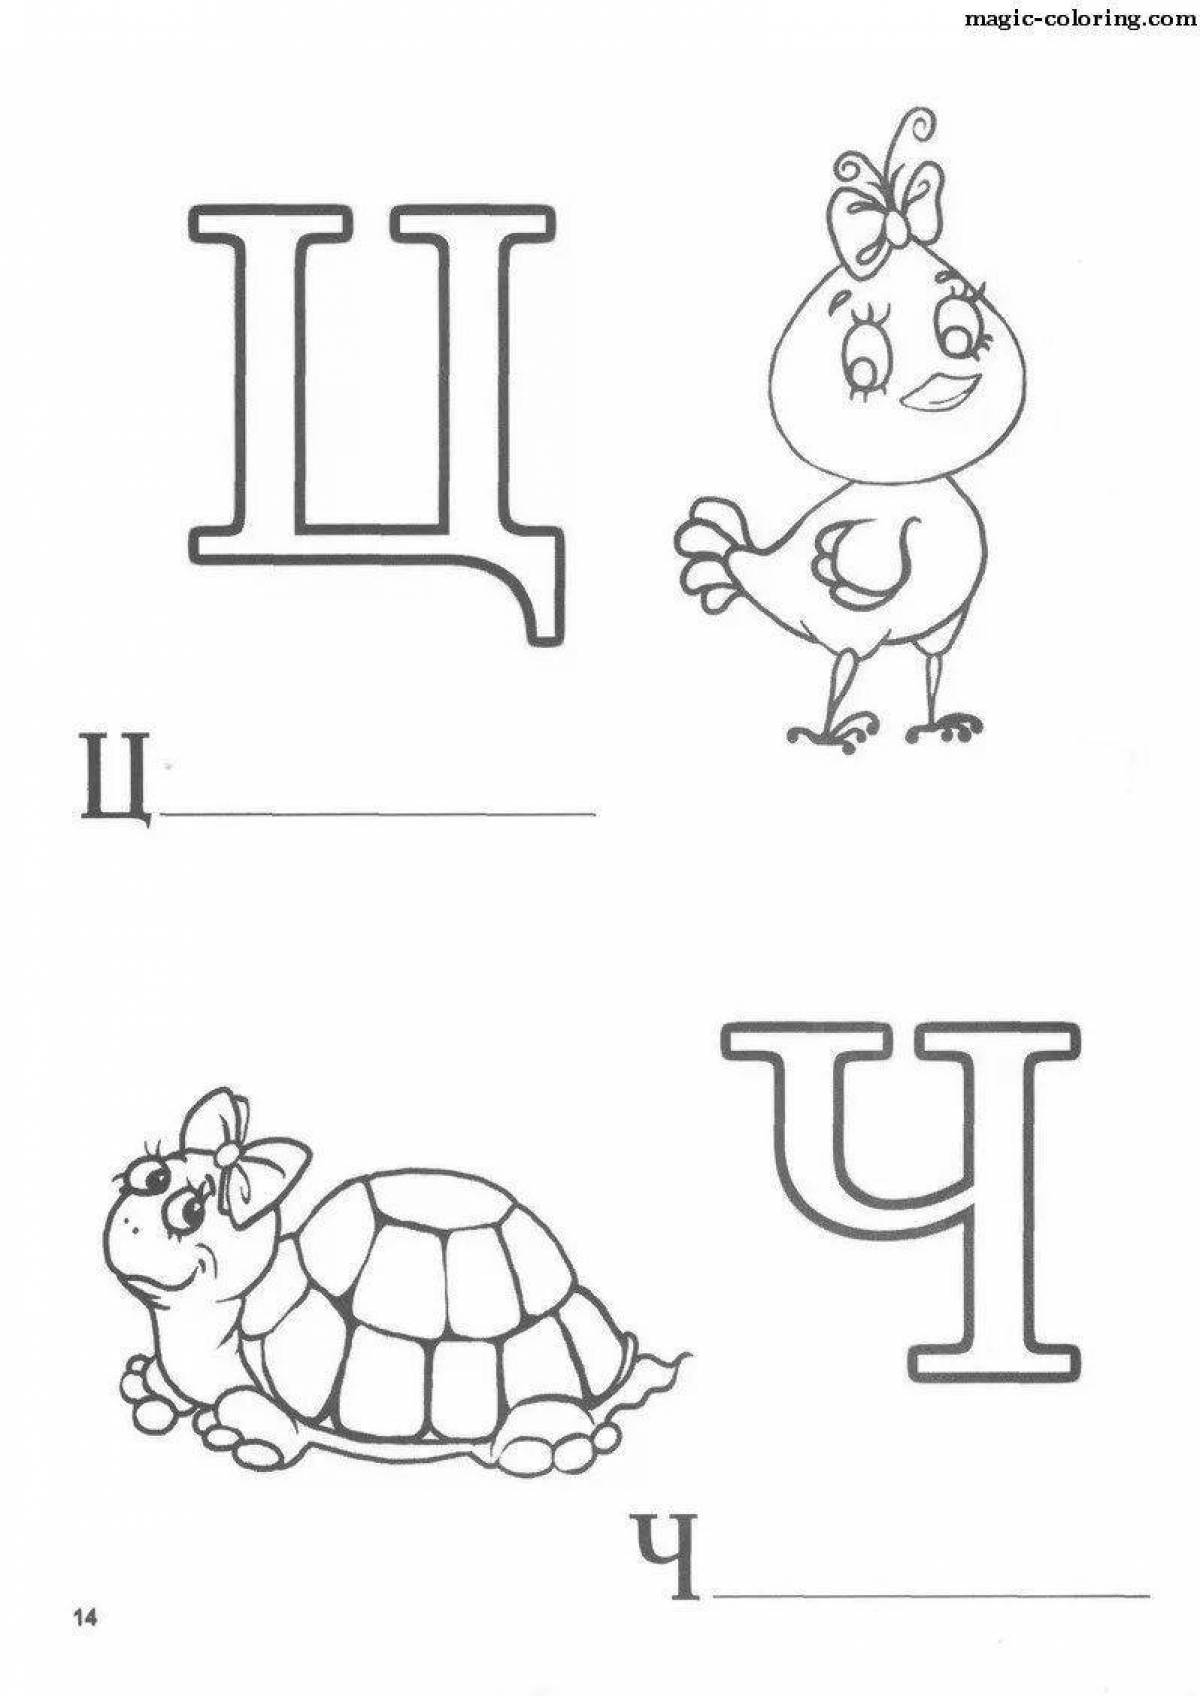 Colorful alphabet coloring page for 3-4 year olds